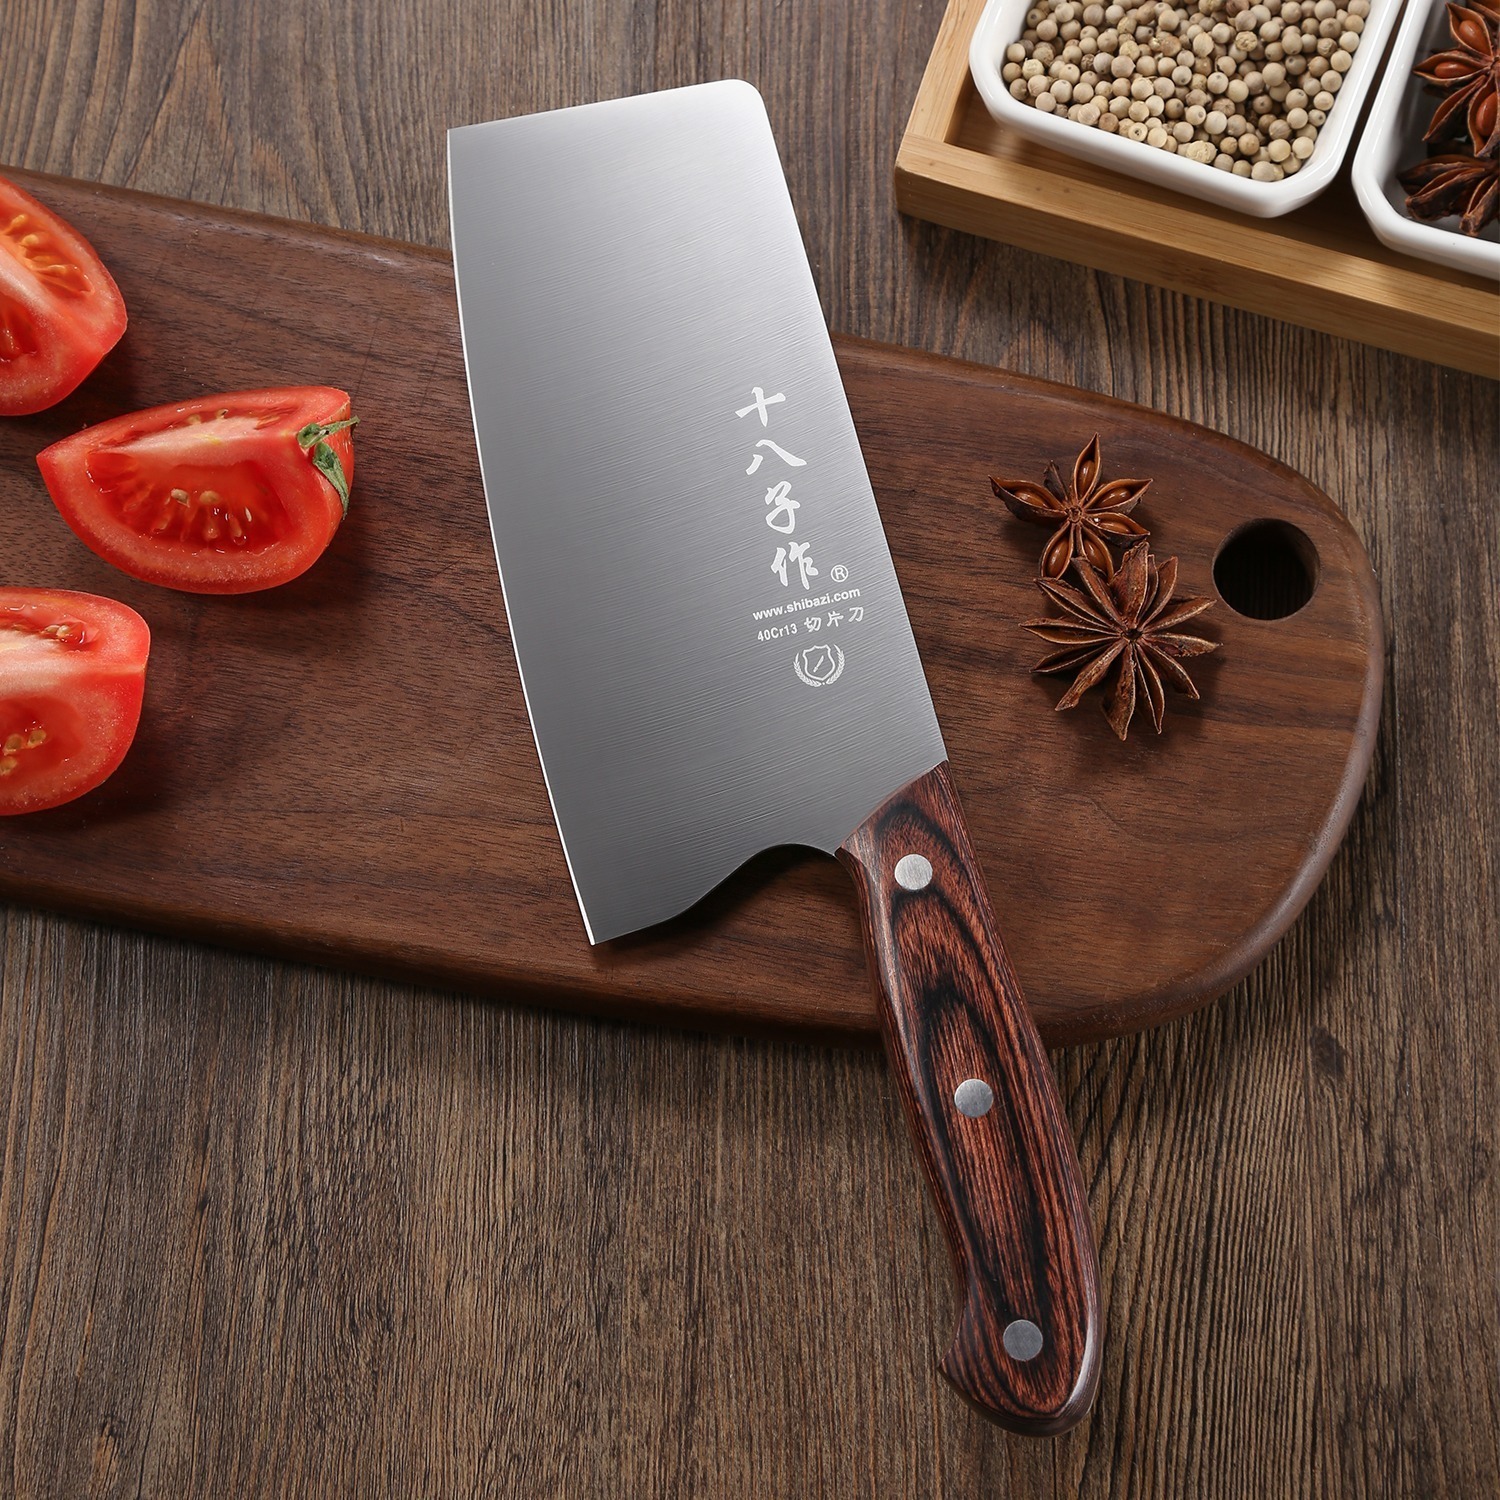 Shi Ba Zi Zuo Stainless Steel Chinese Knife w/ Wooden Handle: 6.7" $23.59, 7" $25.70 + Free Shipping w/ Prime or orders $25+